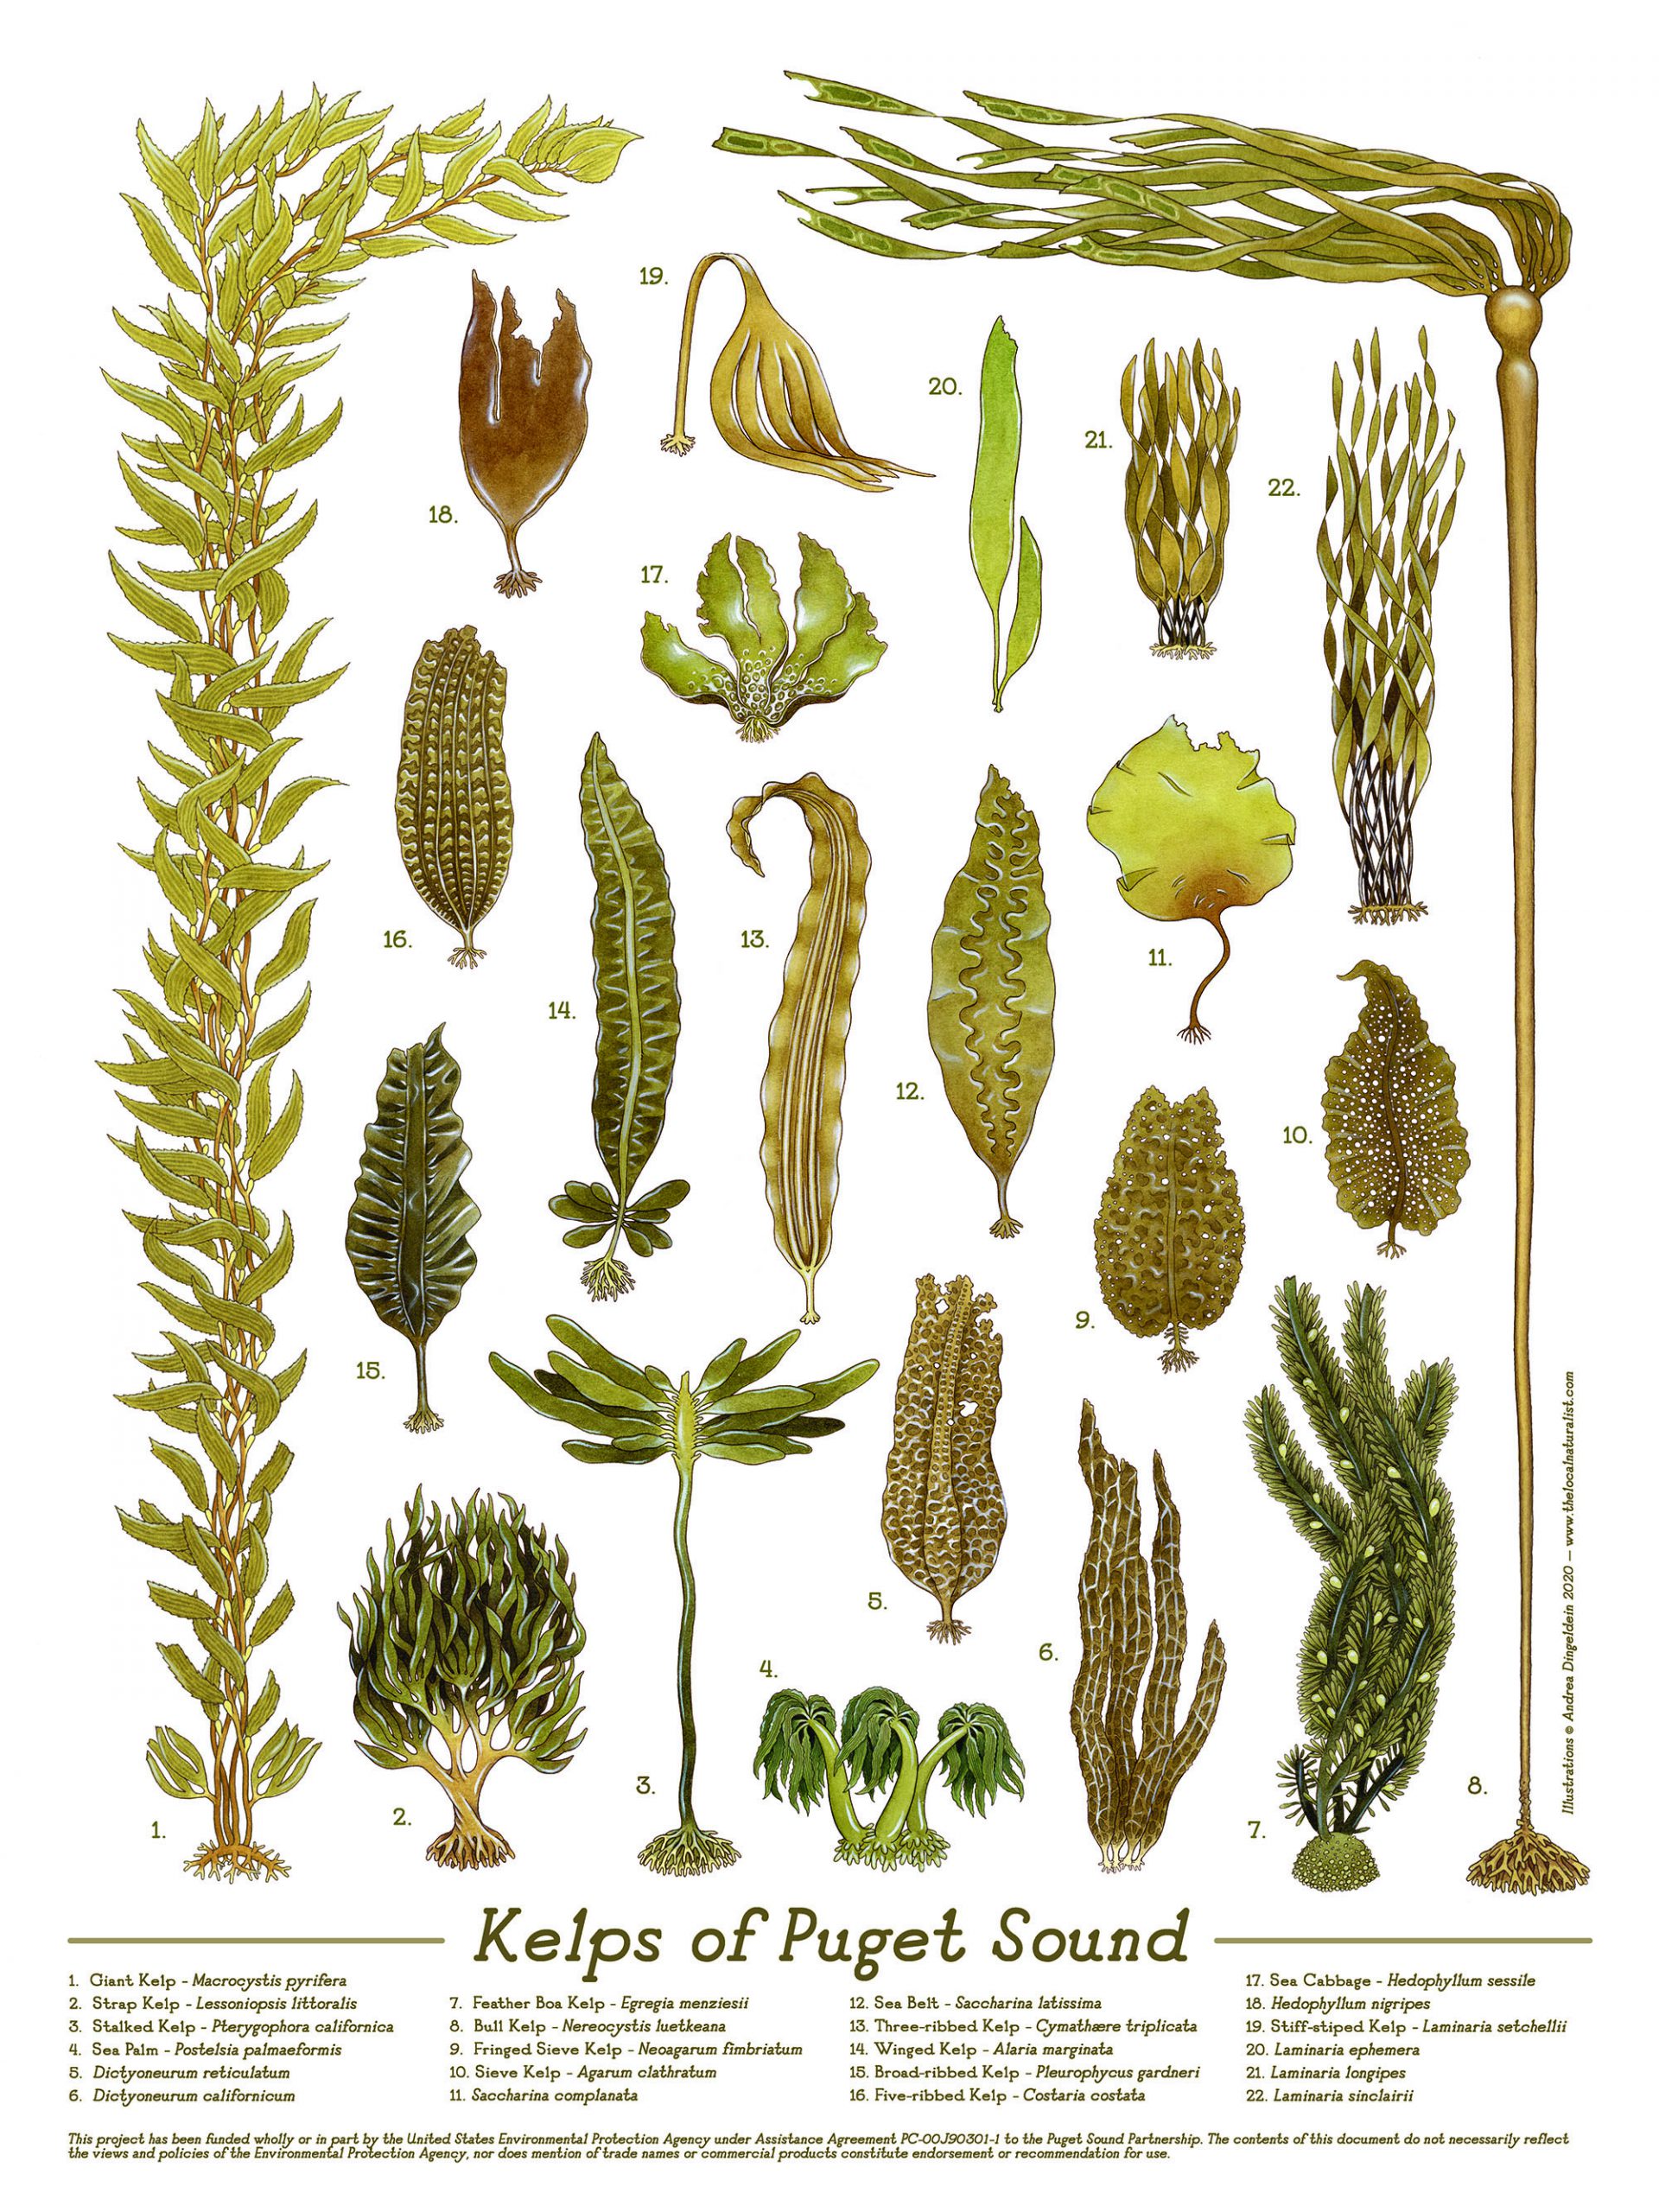 Illustration of the 22 species of kelp in Puget Sound, created by Andrea Dingeldein.